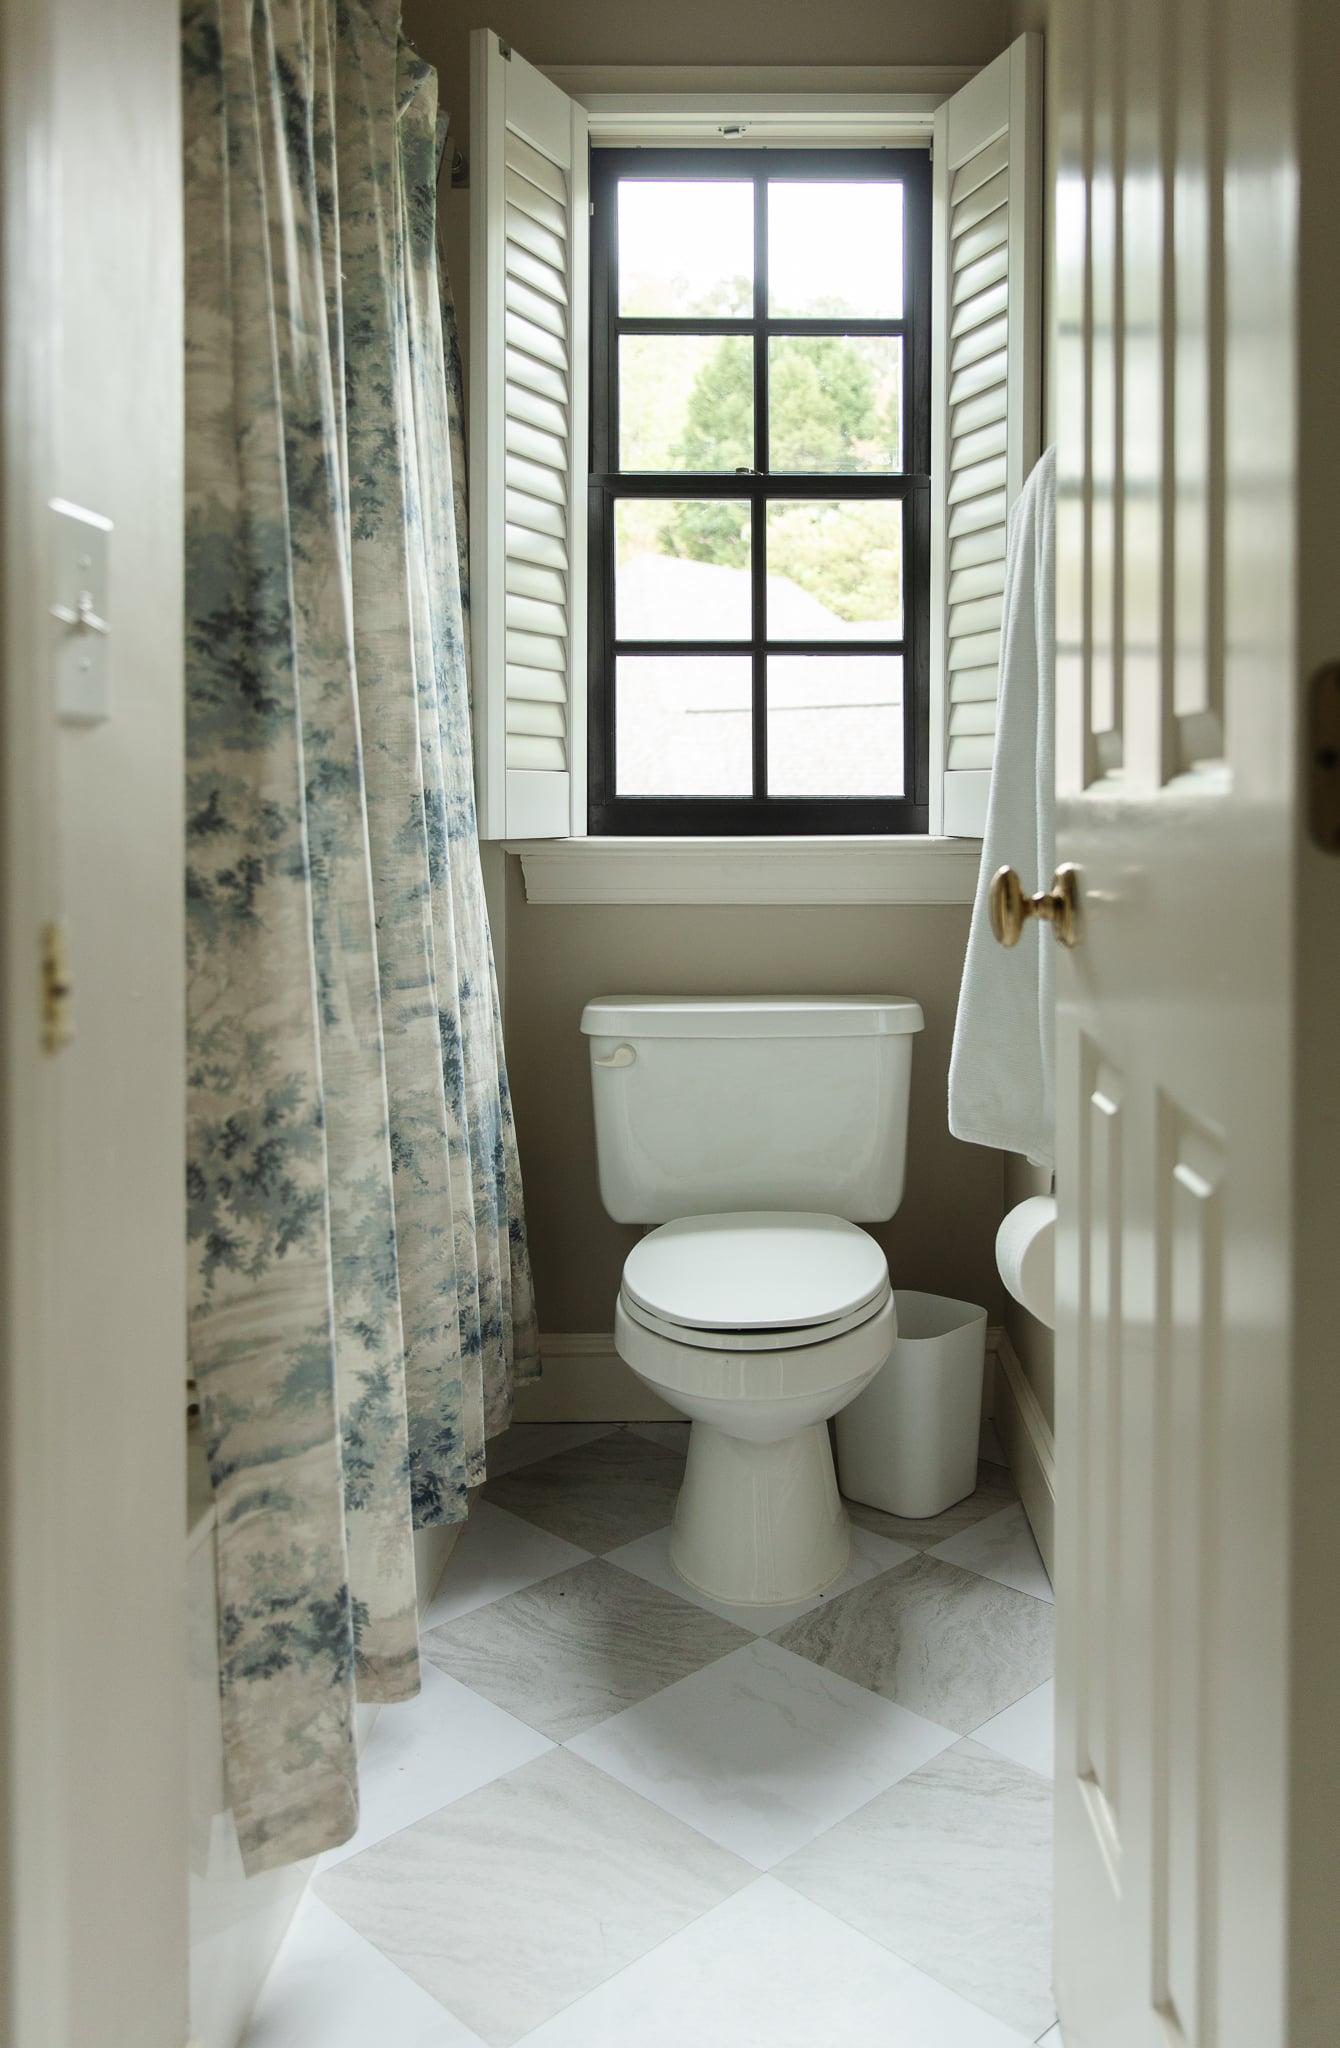 Chris Loves Julia | Jack & Jill bathroom with toile shower curtain and gray and white FloorPops